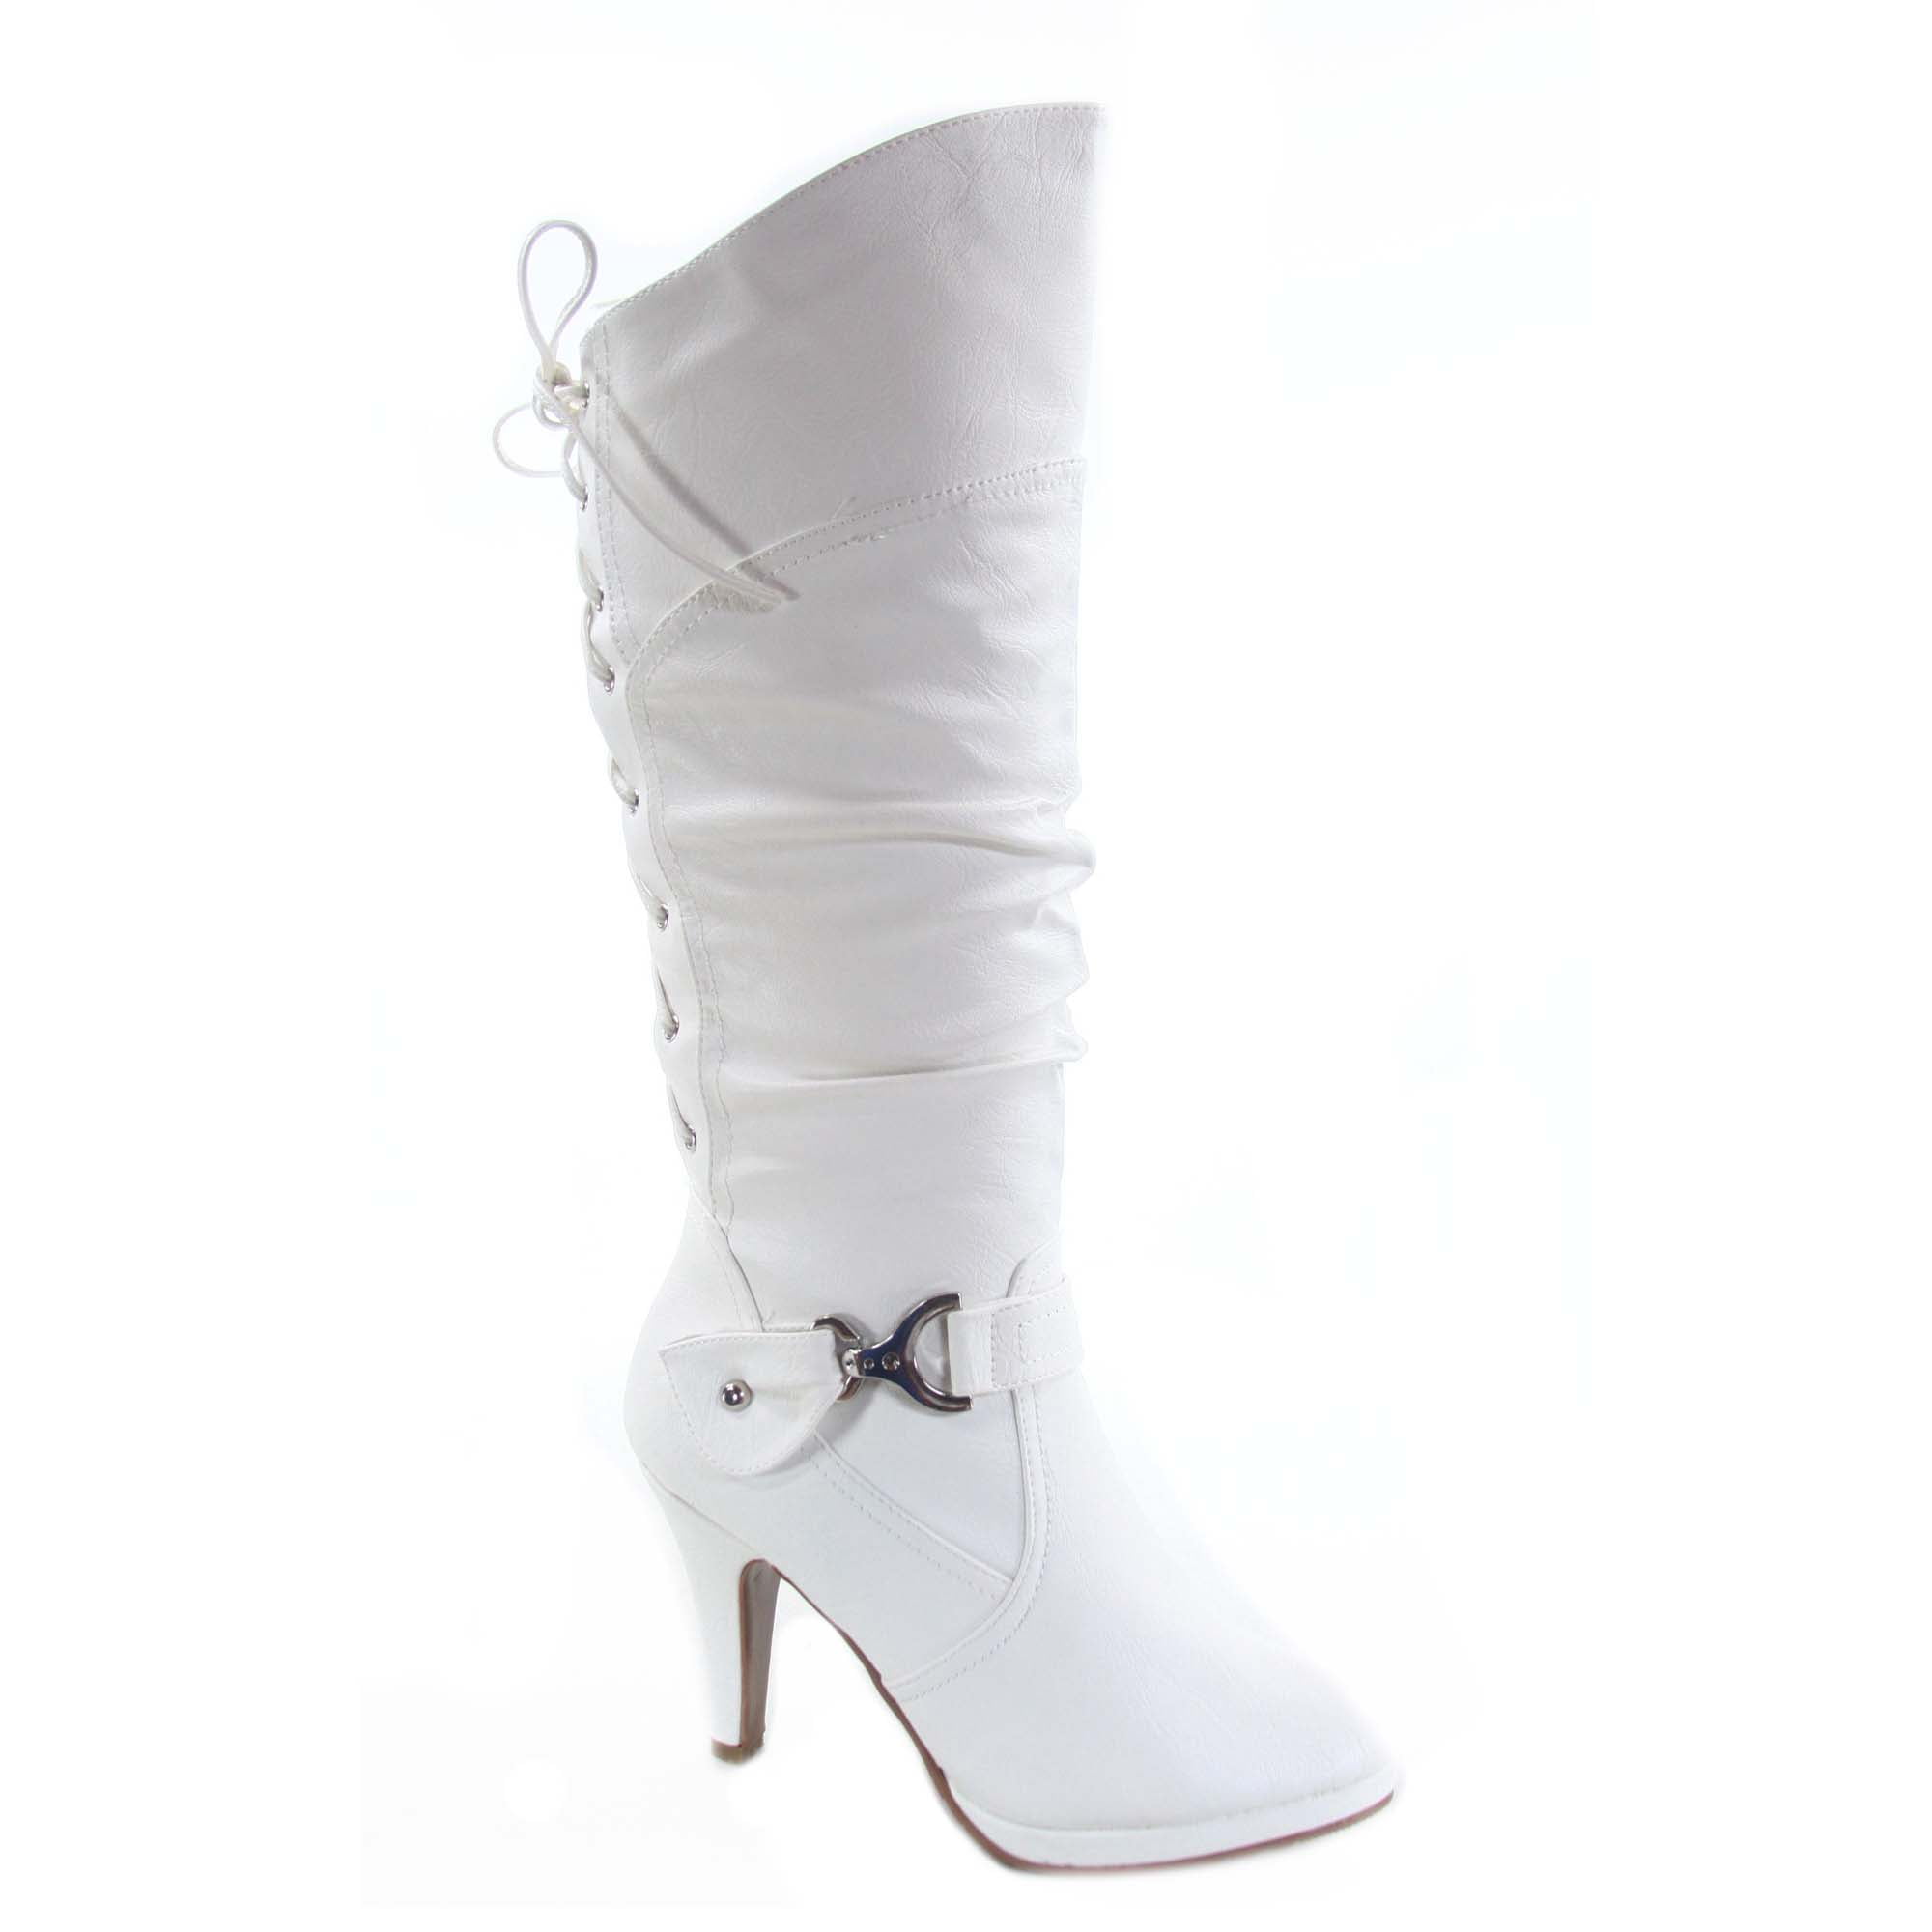 Top Moda Womens Page-65 Knee High Round Toe Lace-up Slouched High Heel Boots,  White,  